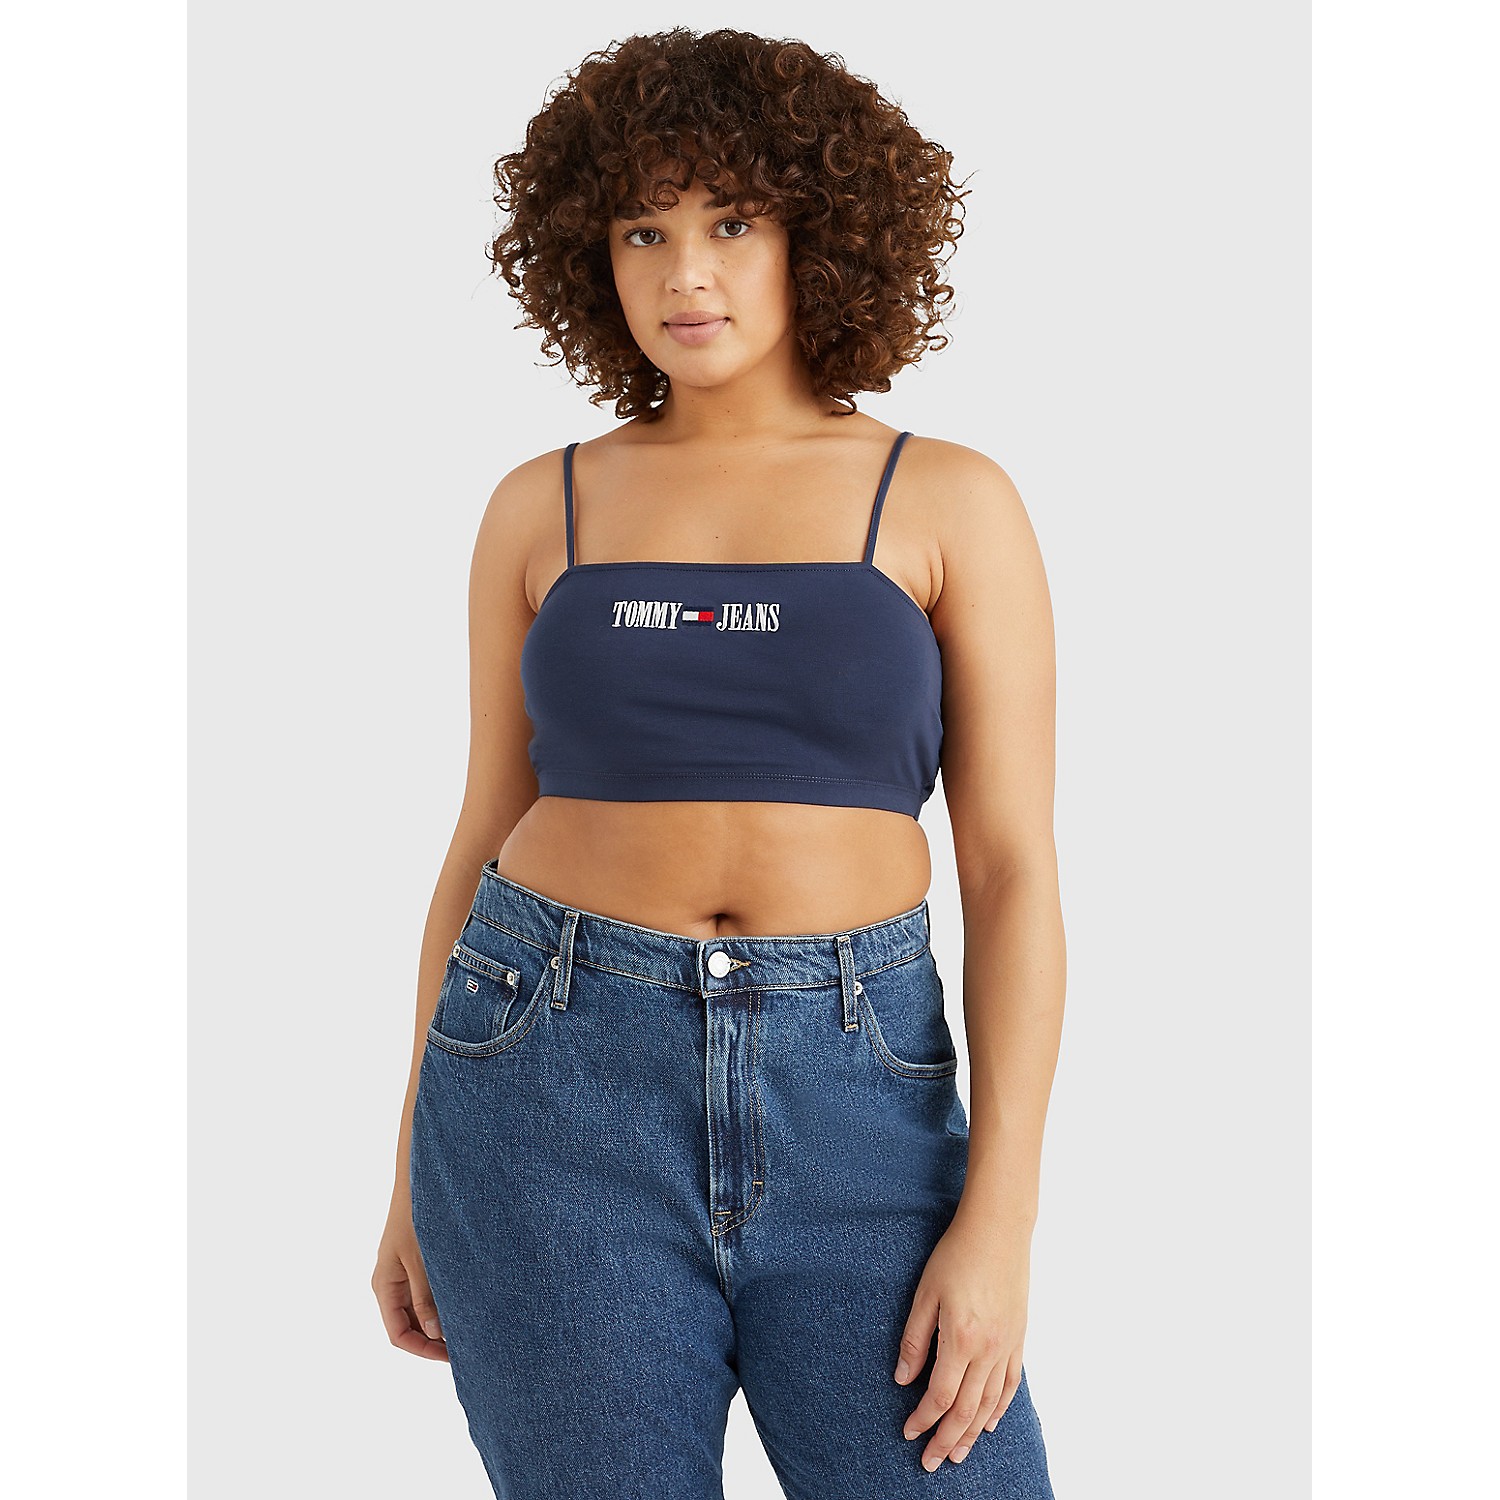 TOMMY HILFIGER Curve Retro Logo Cropped Tank Top